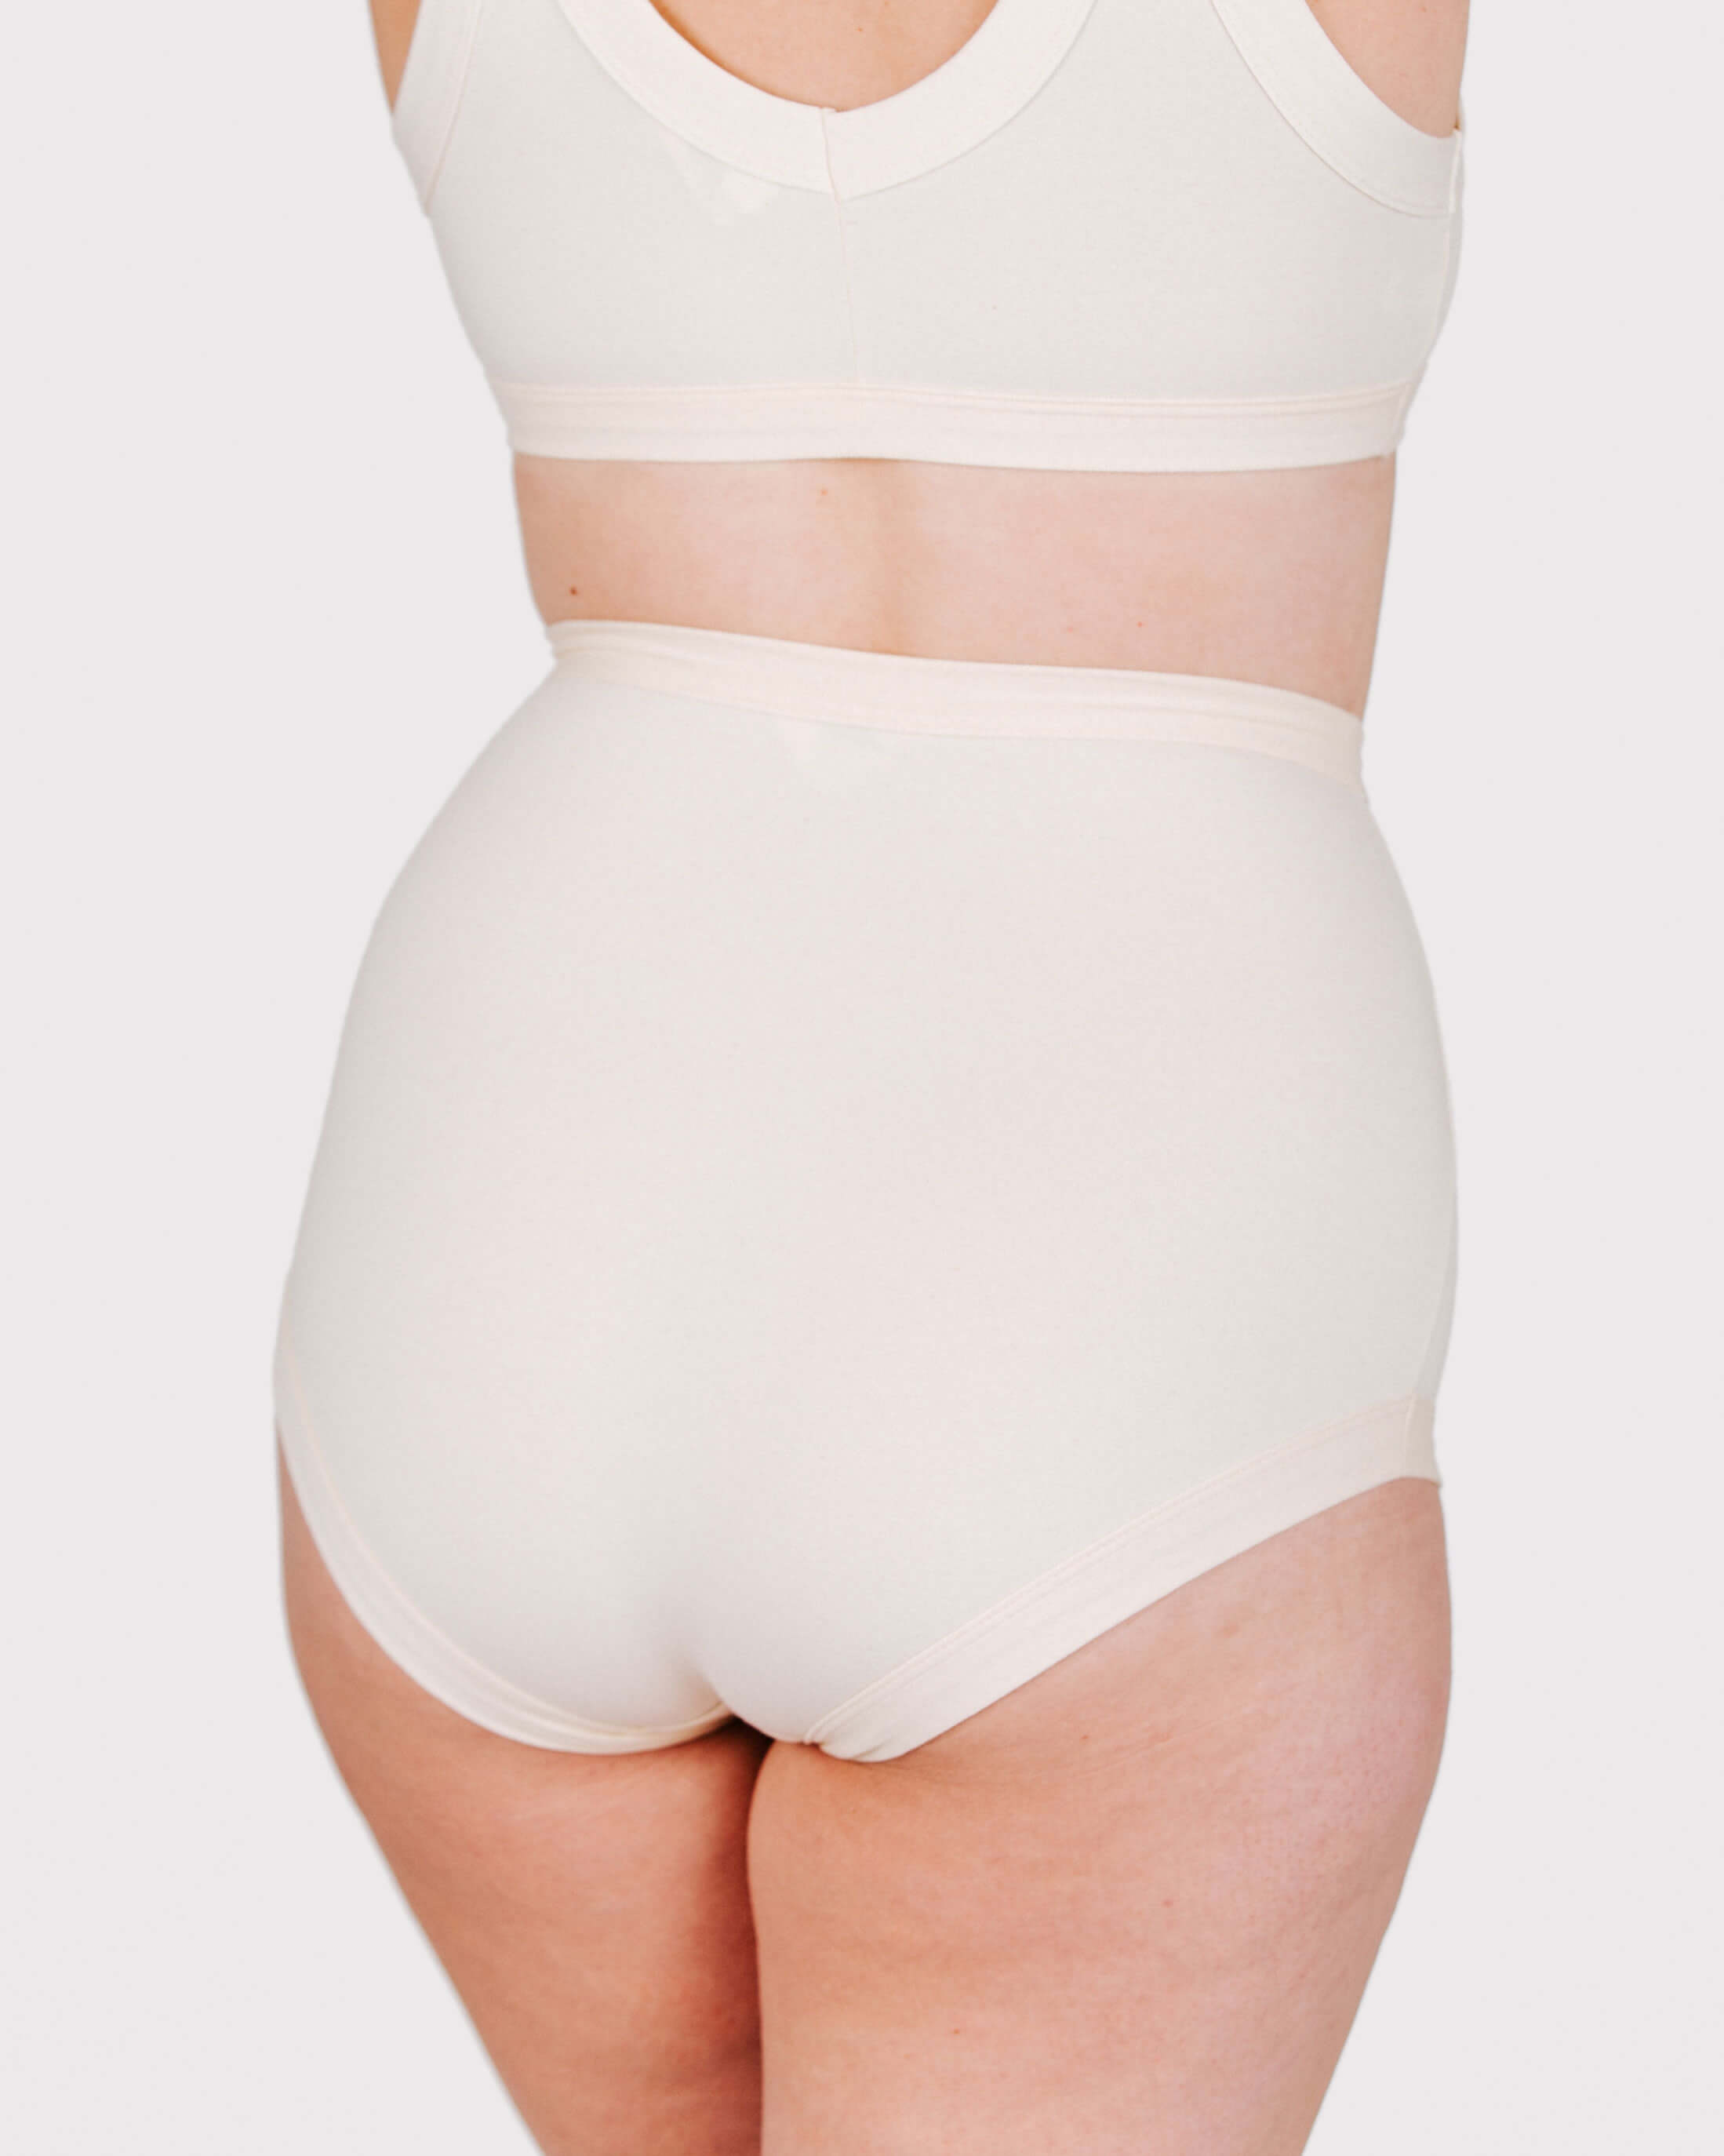 Fit photo from the back of Thunderpants organic cotton Sky Rise style underwear in off-white, showing a wedgie-free bum, on a model